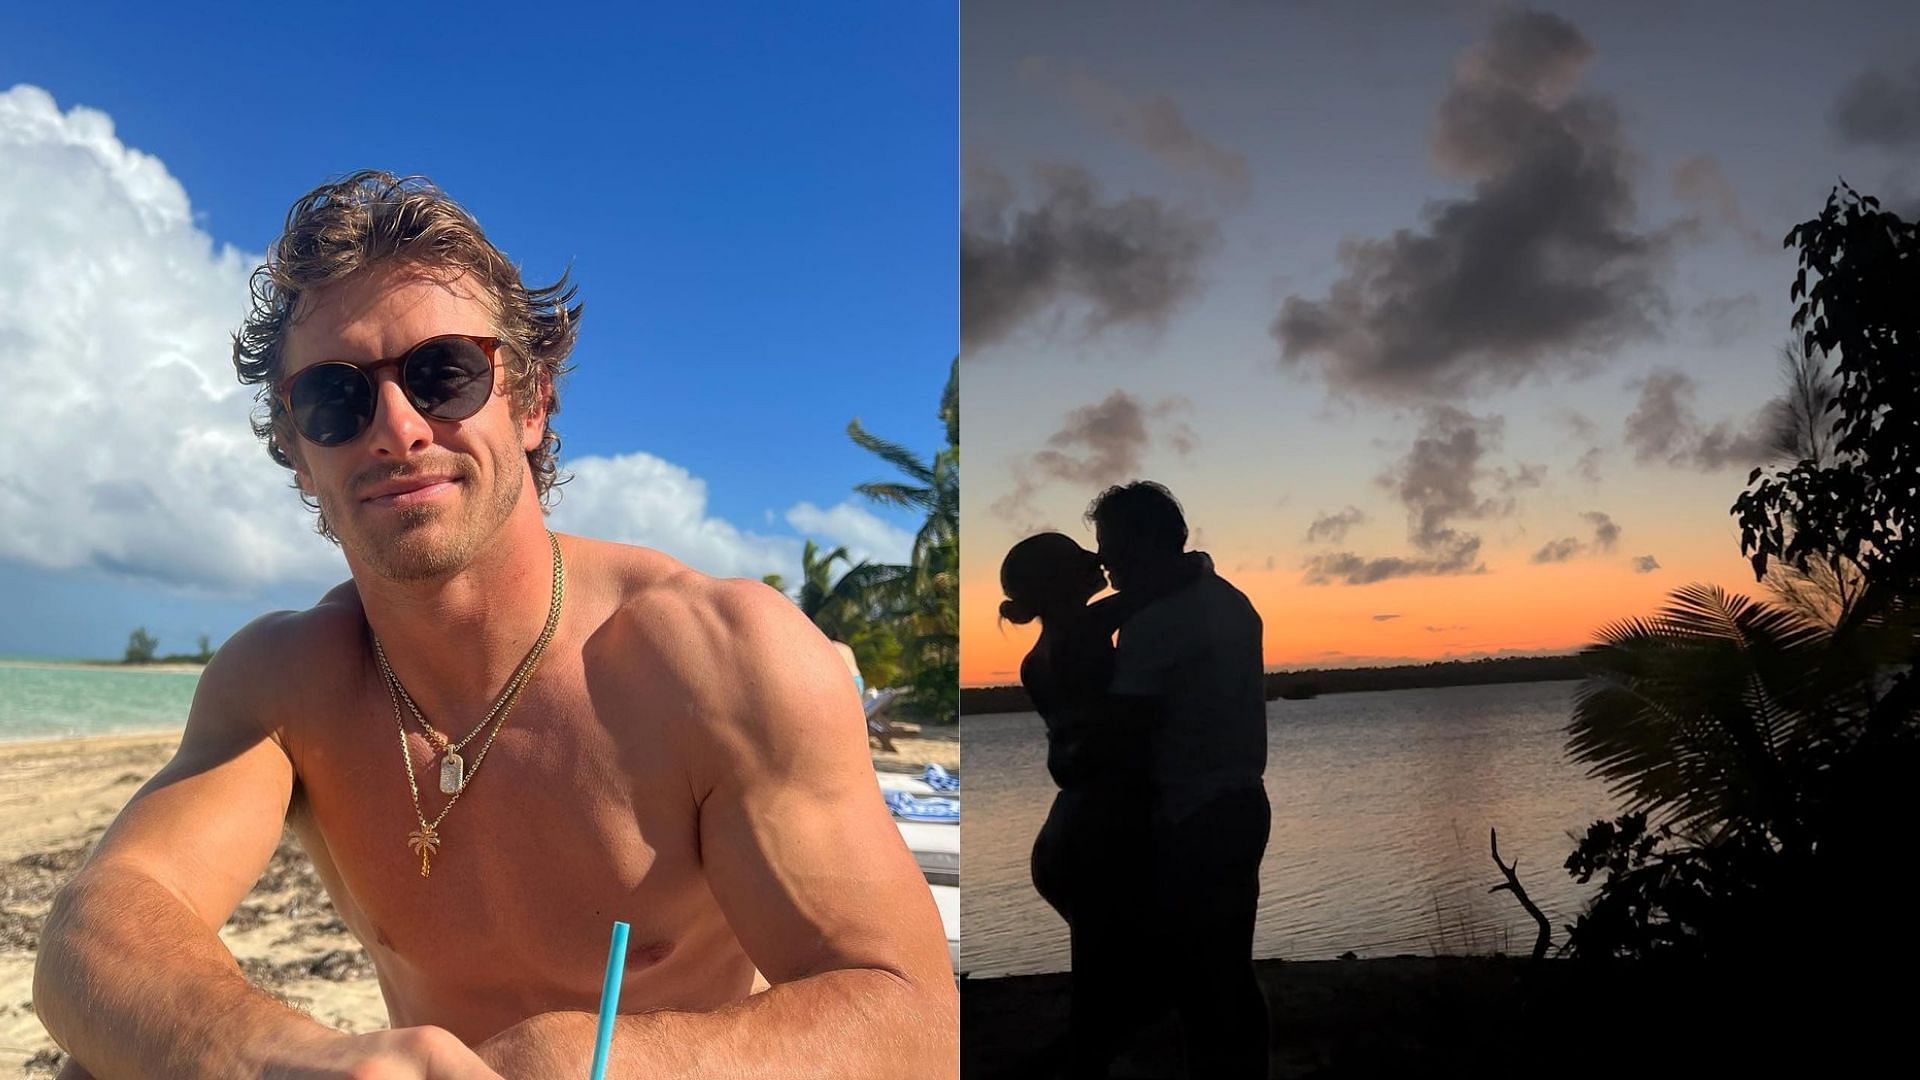 Braxton Berrios and Alix Earle went to the Bahamas. (Image credit: @braxtonberrios on Instagram)